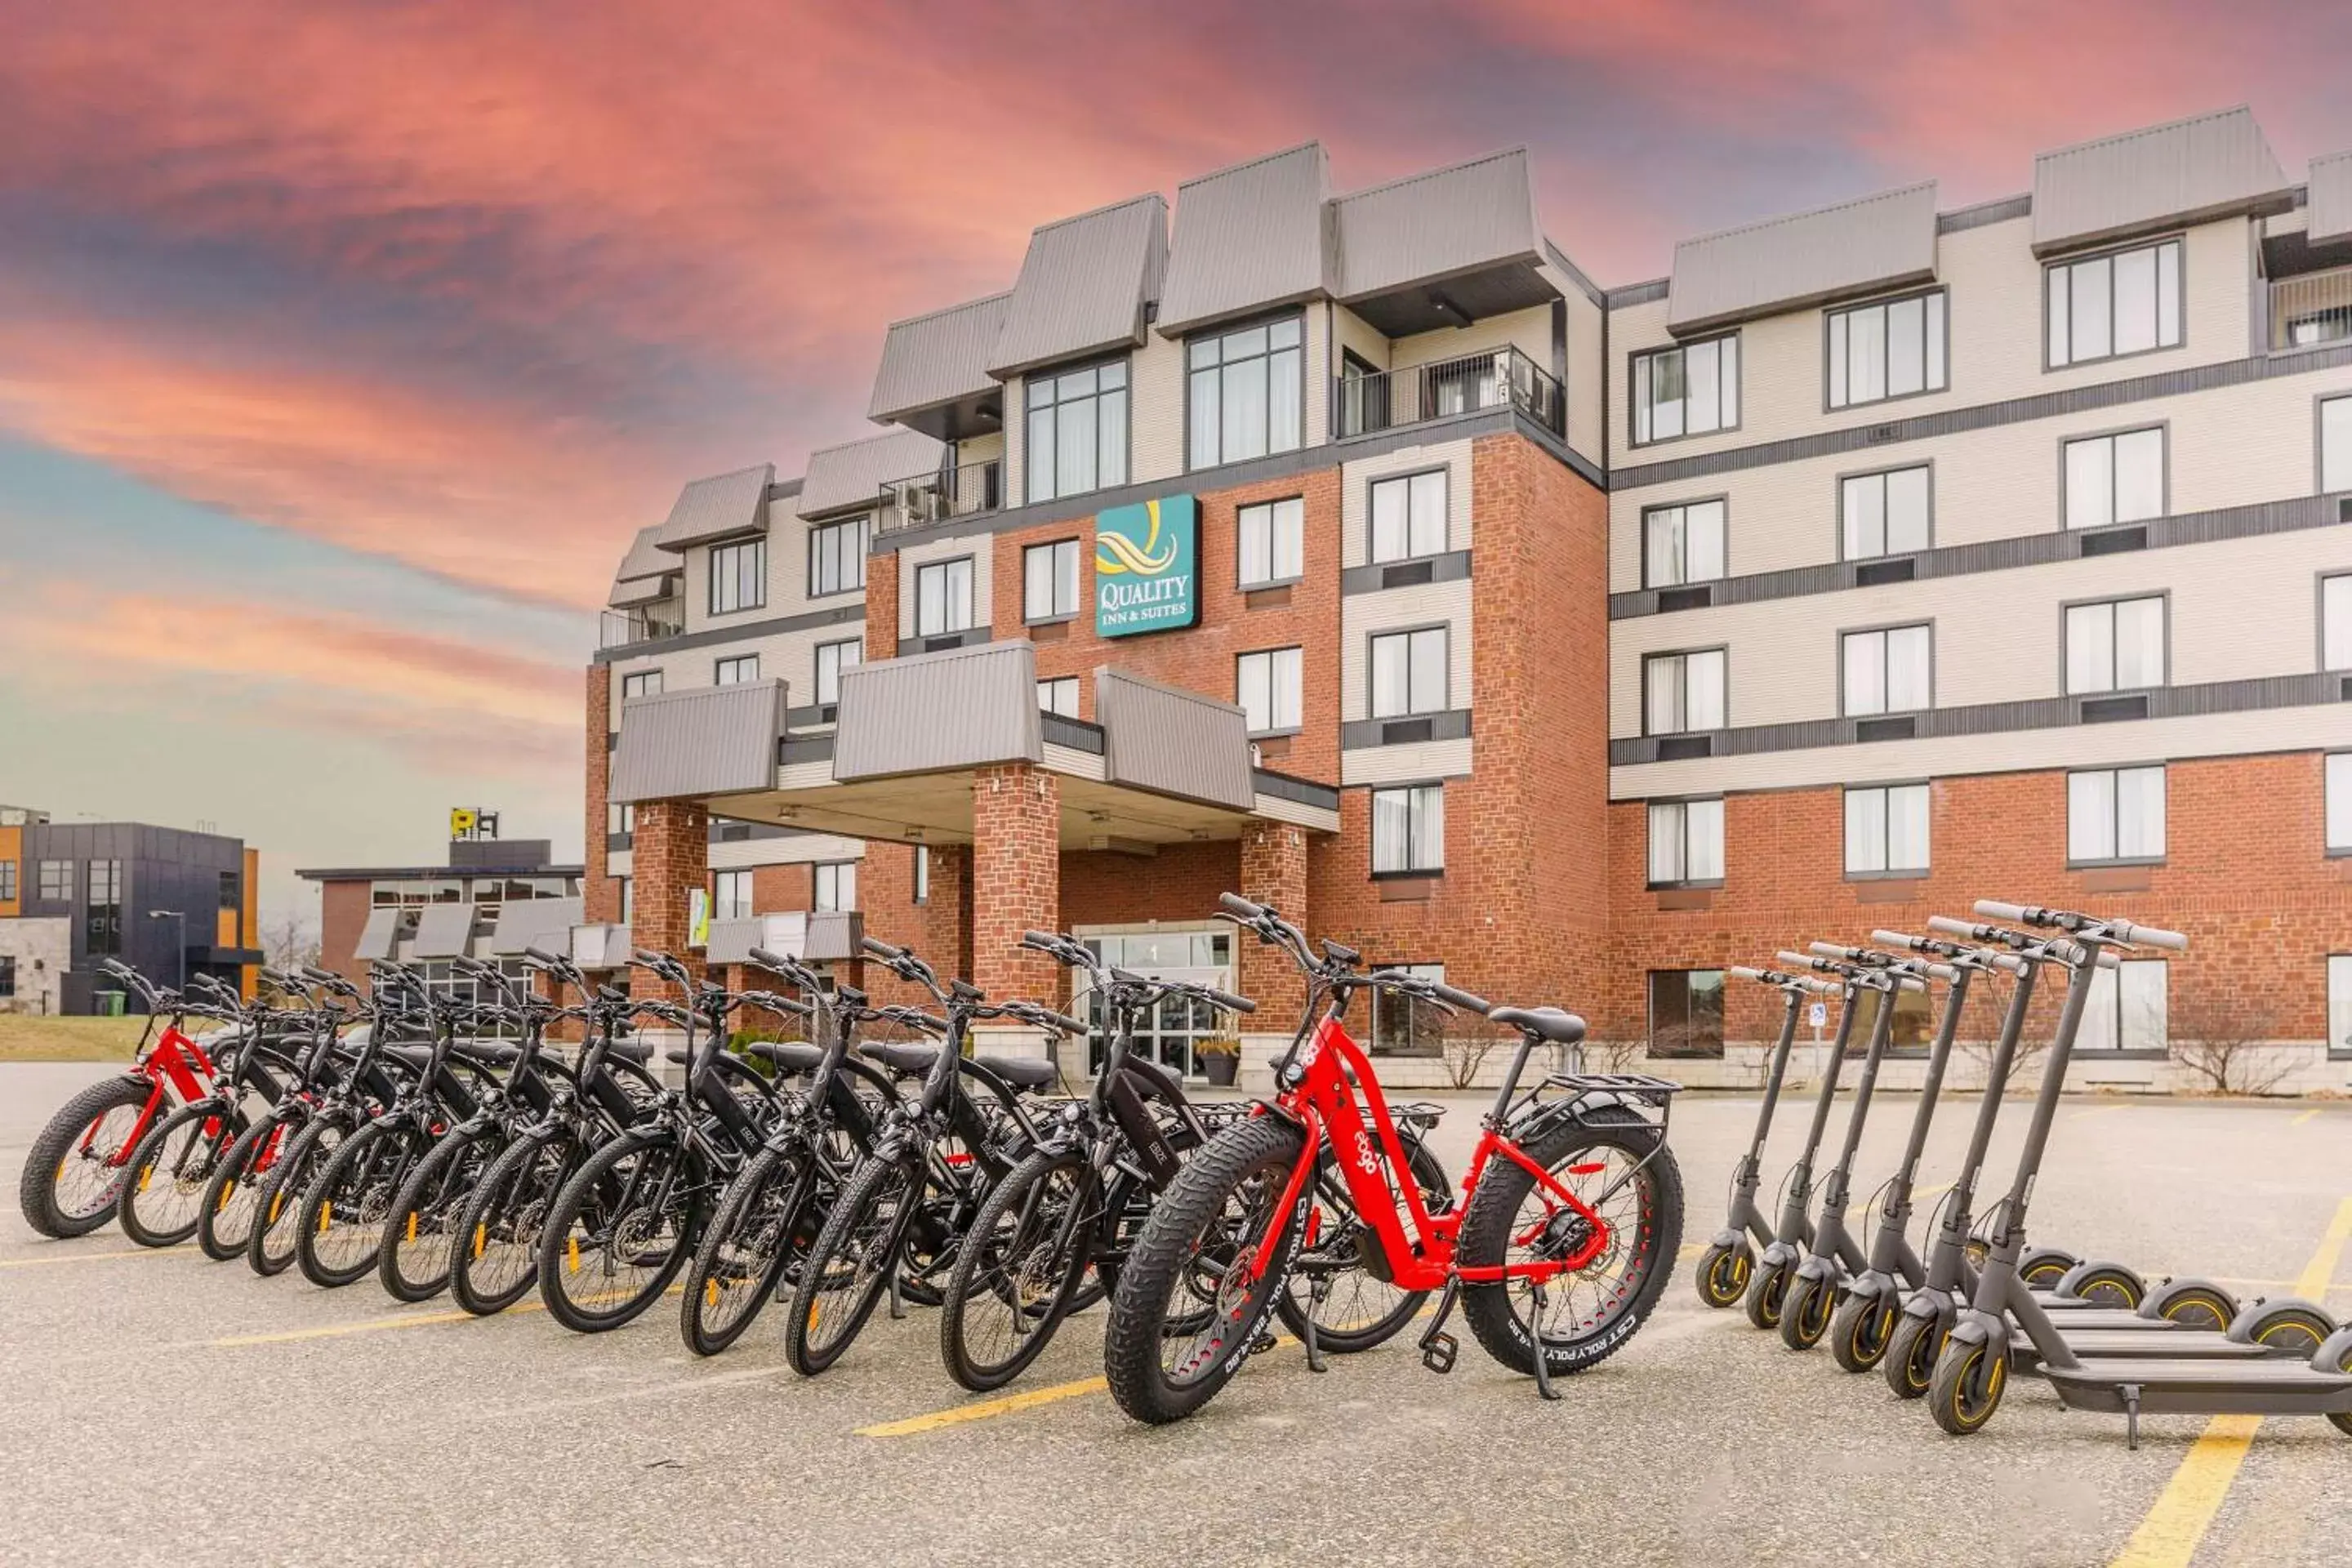 Property Building in Quality Inn & Suites Victoriaville